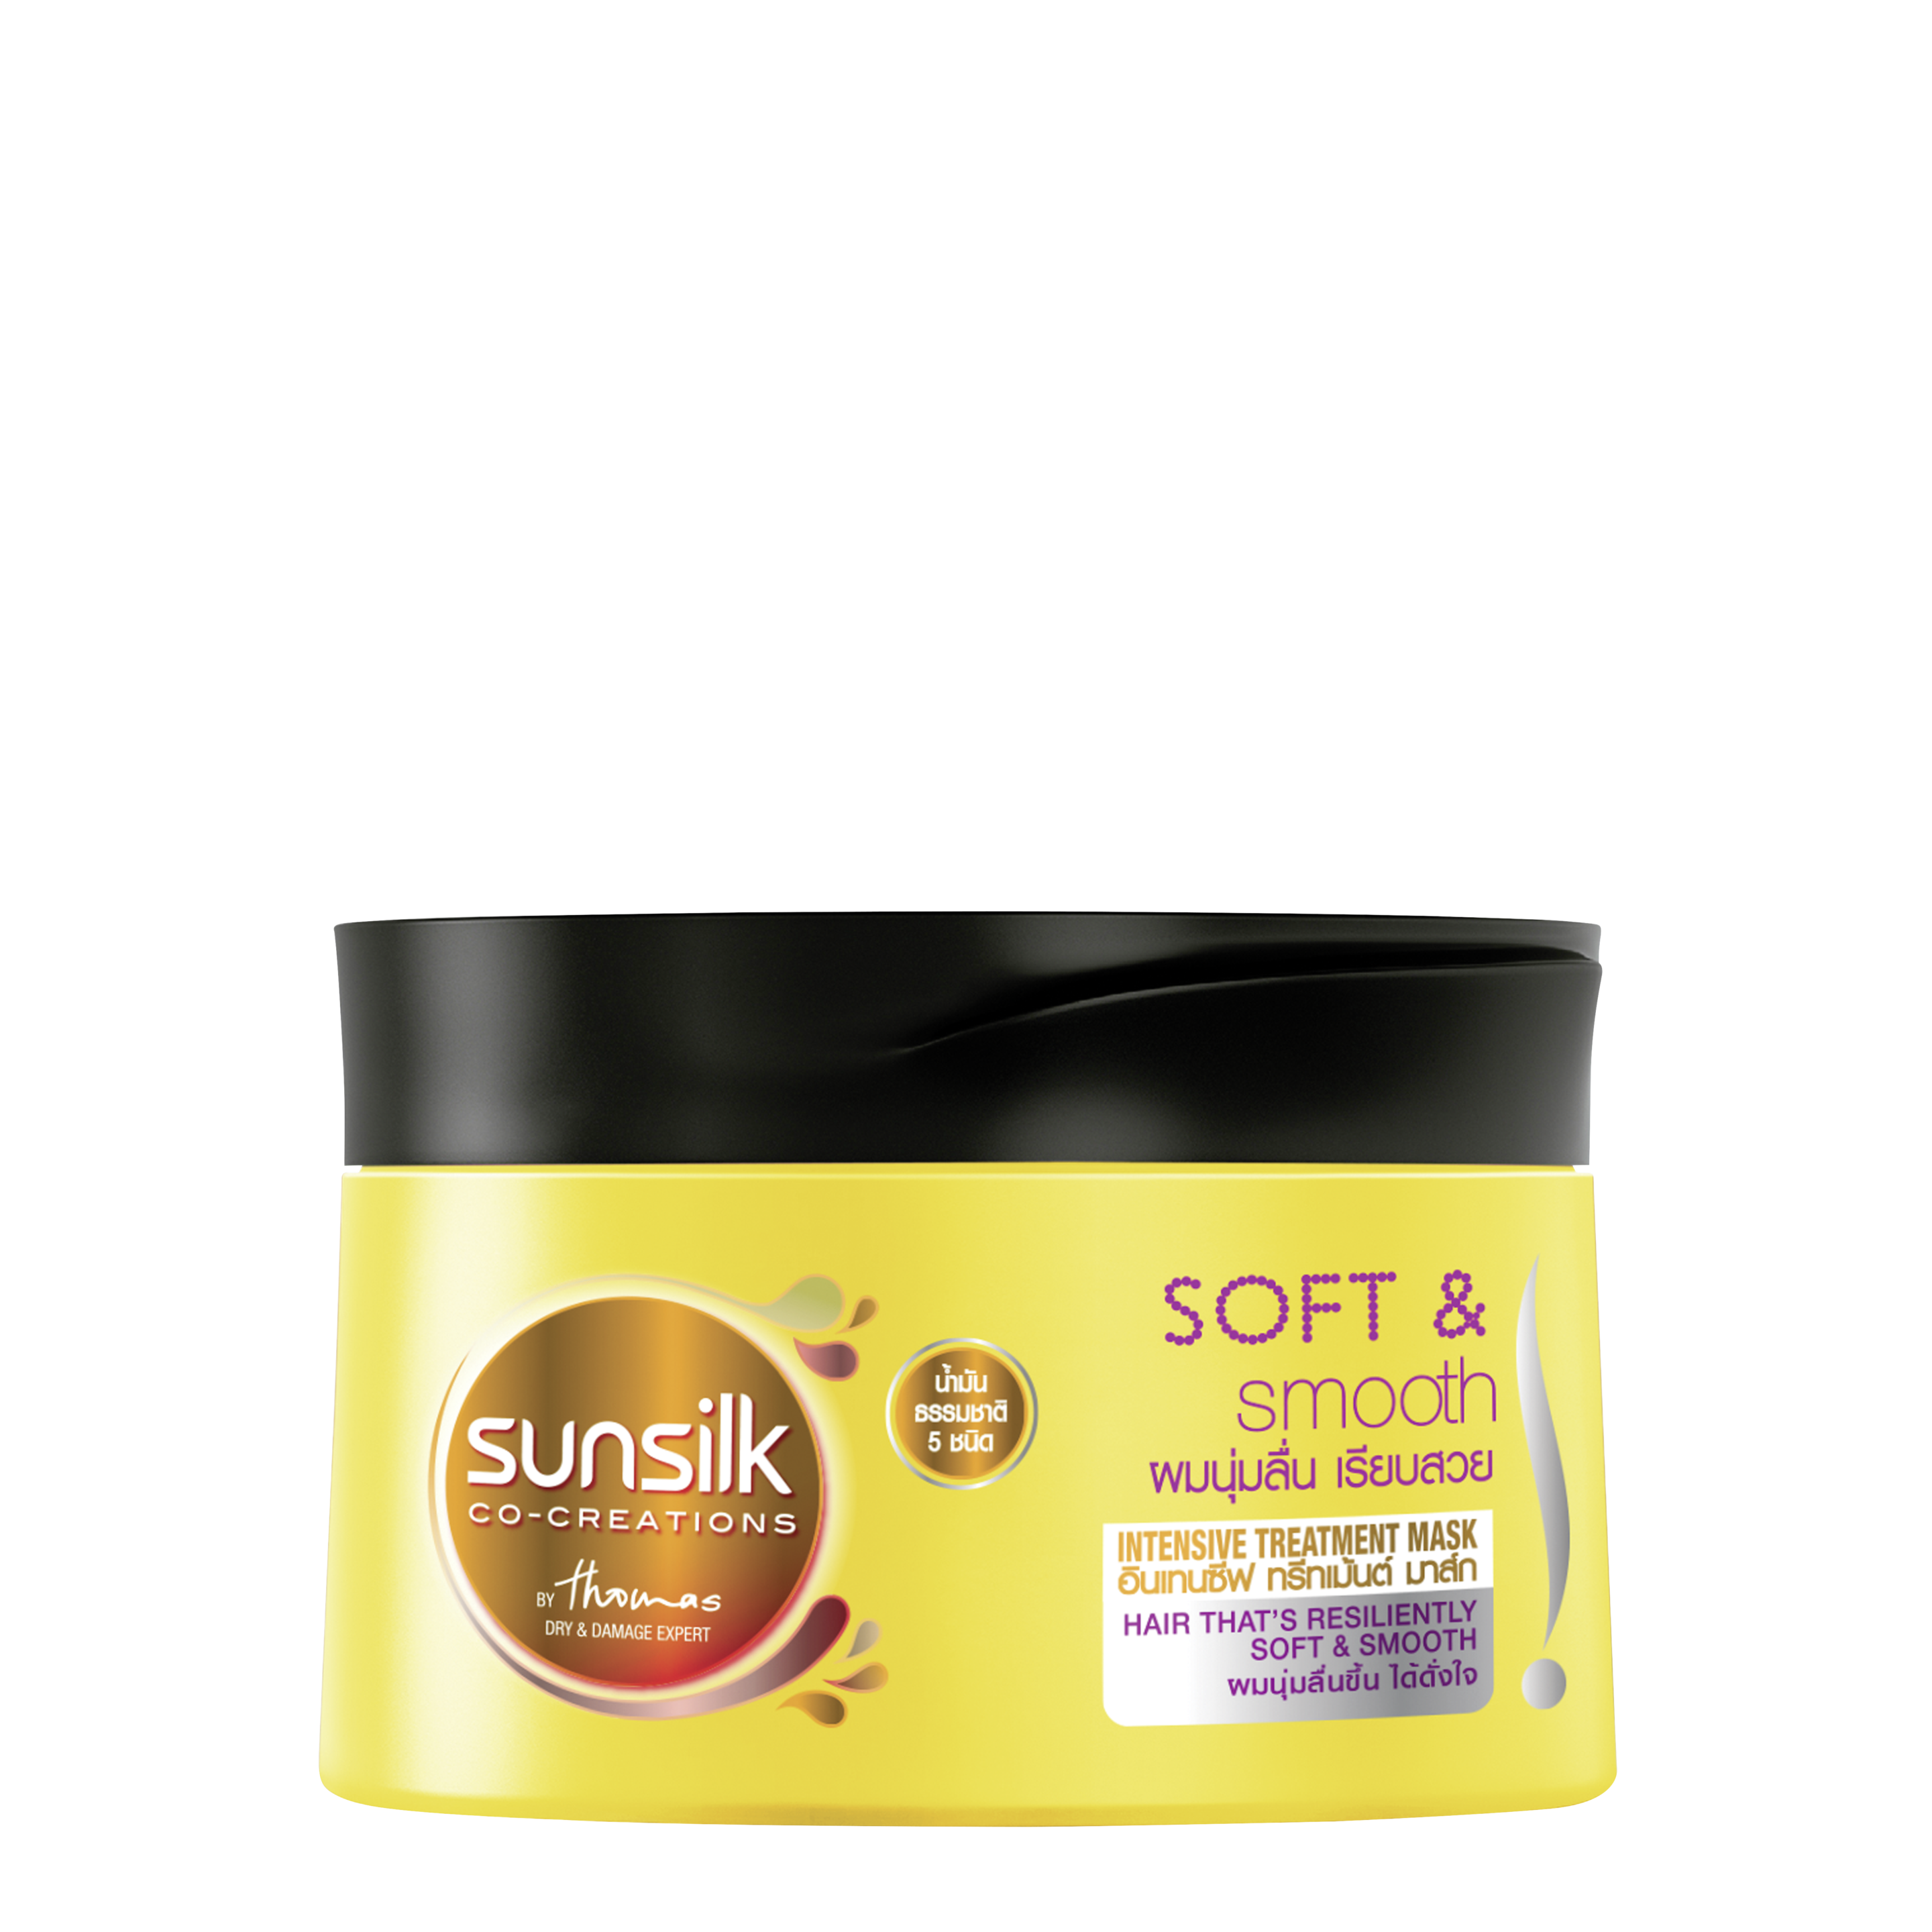 Soft & Smooth Intensive Treatment Mask